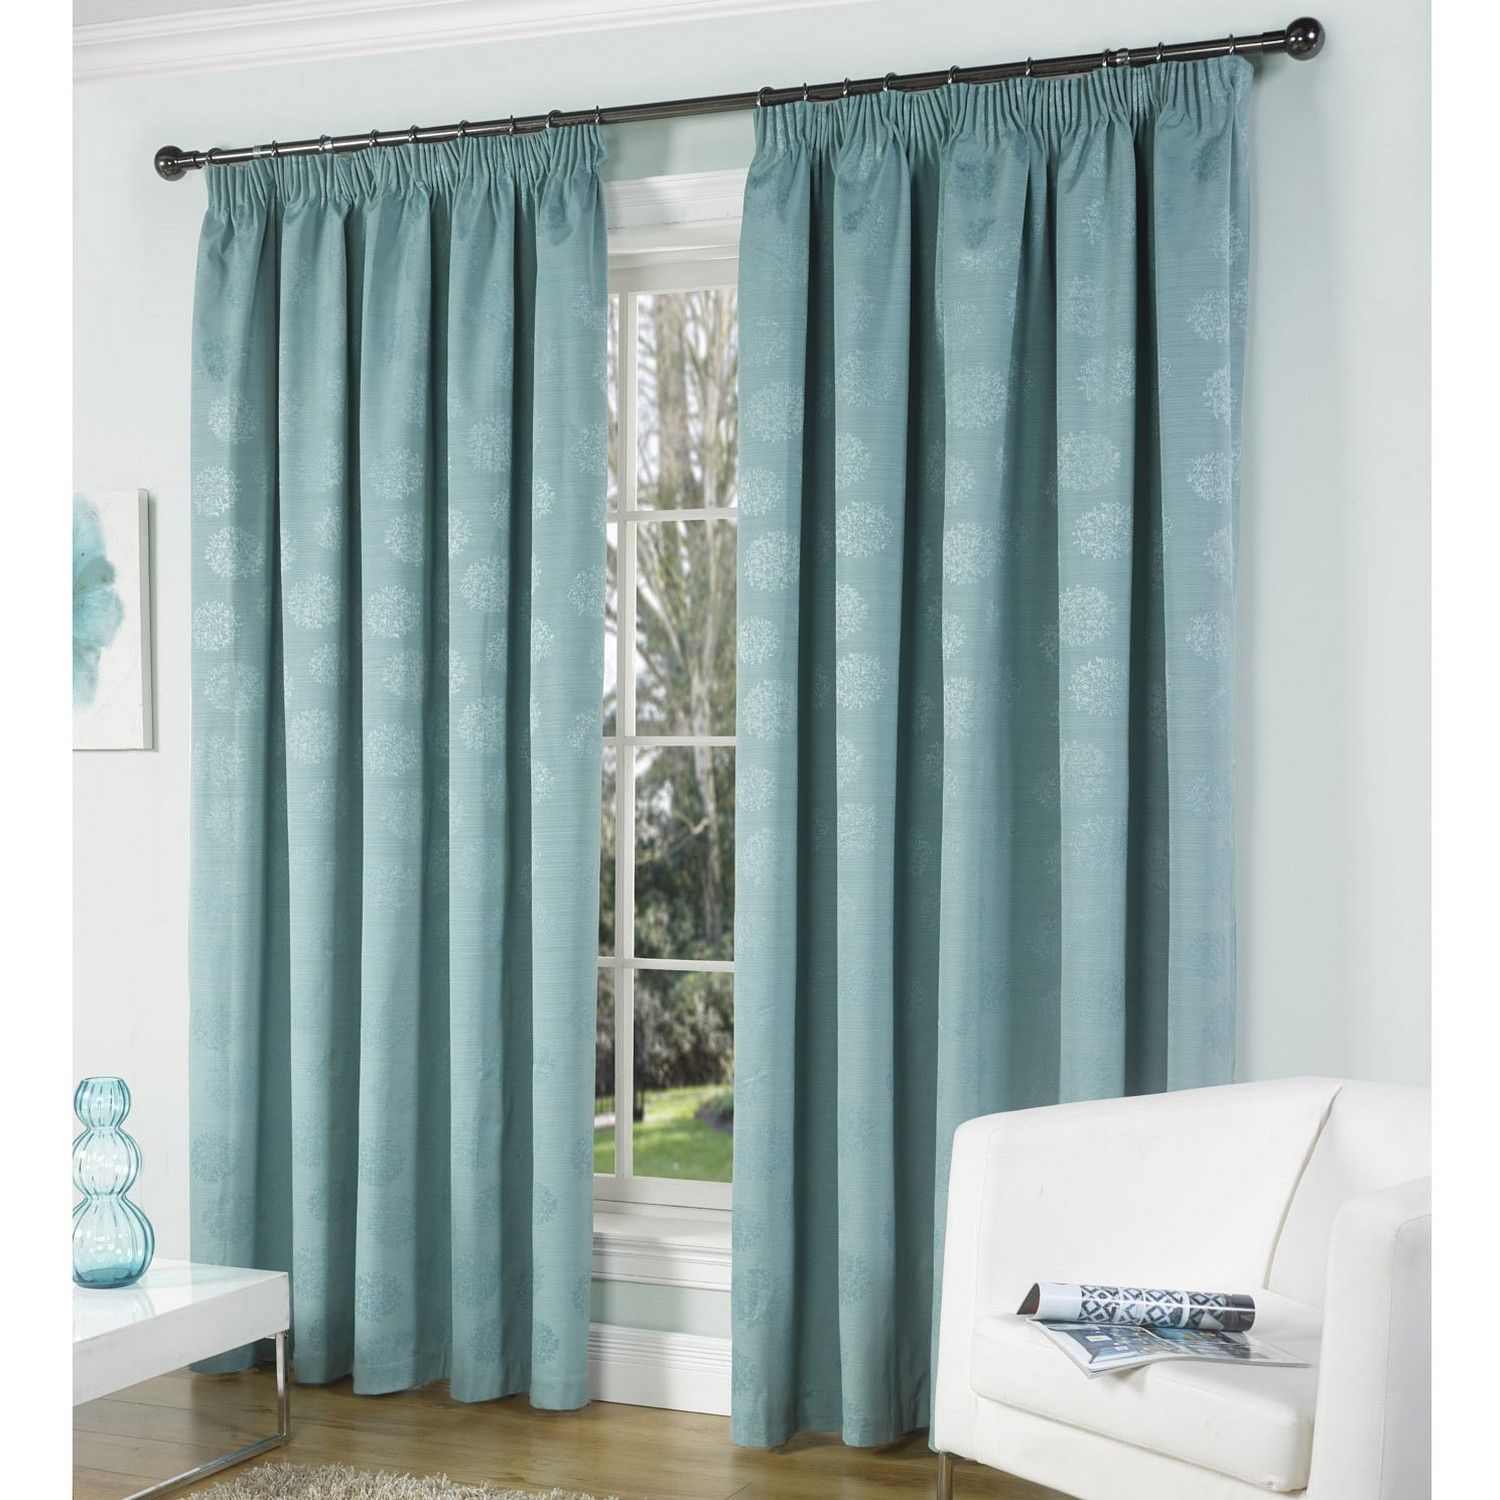 Curtain Stunning Patterned Blackout Curtains Curtain Panels Throughout Plain White Blackout Curtains (View 11 of 15)